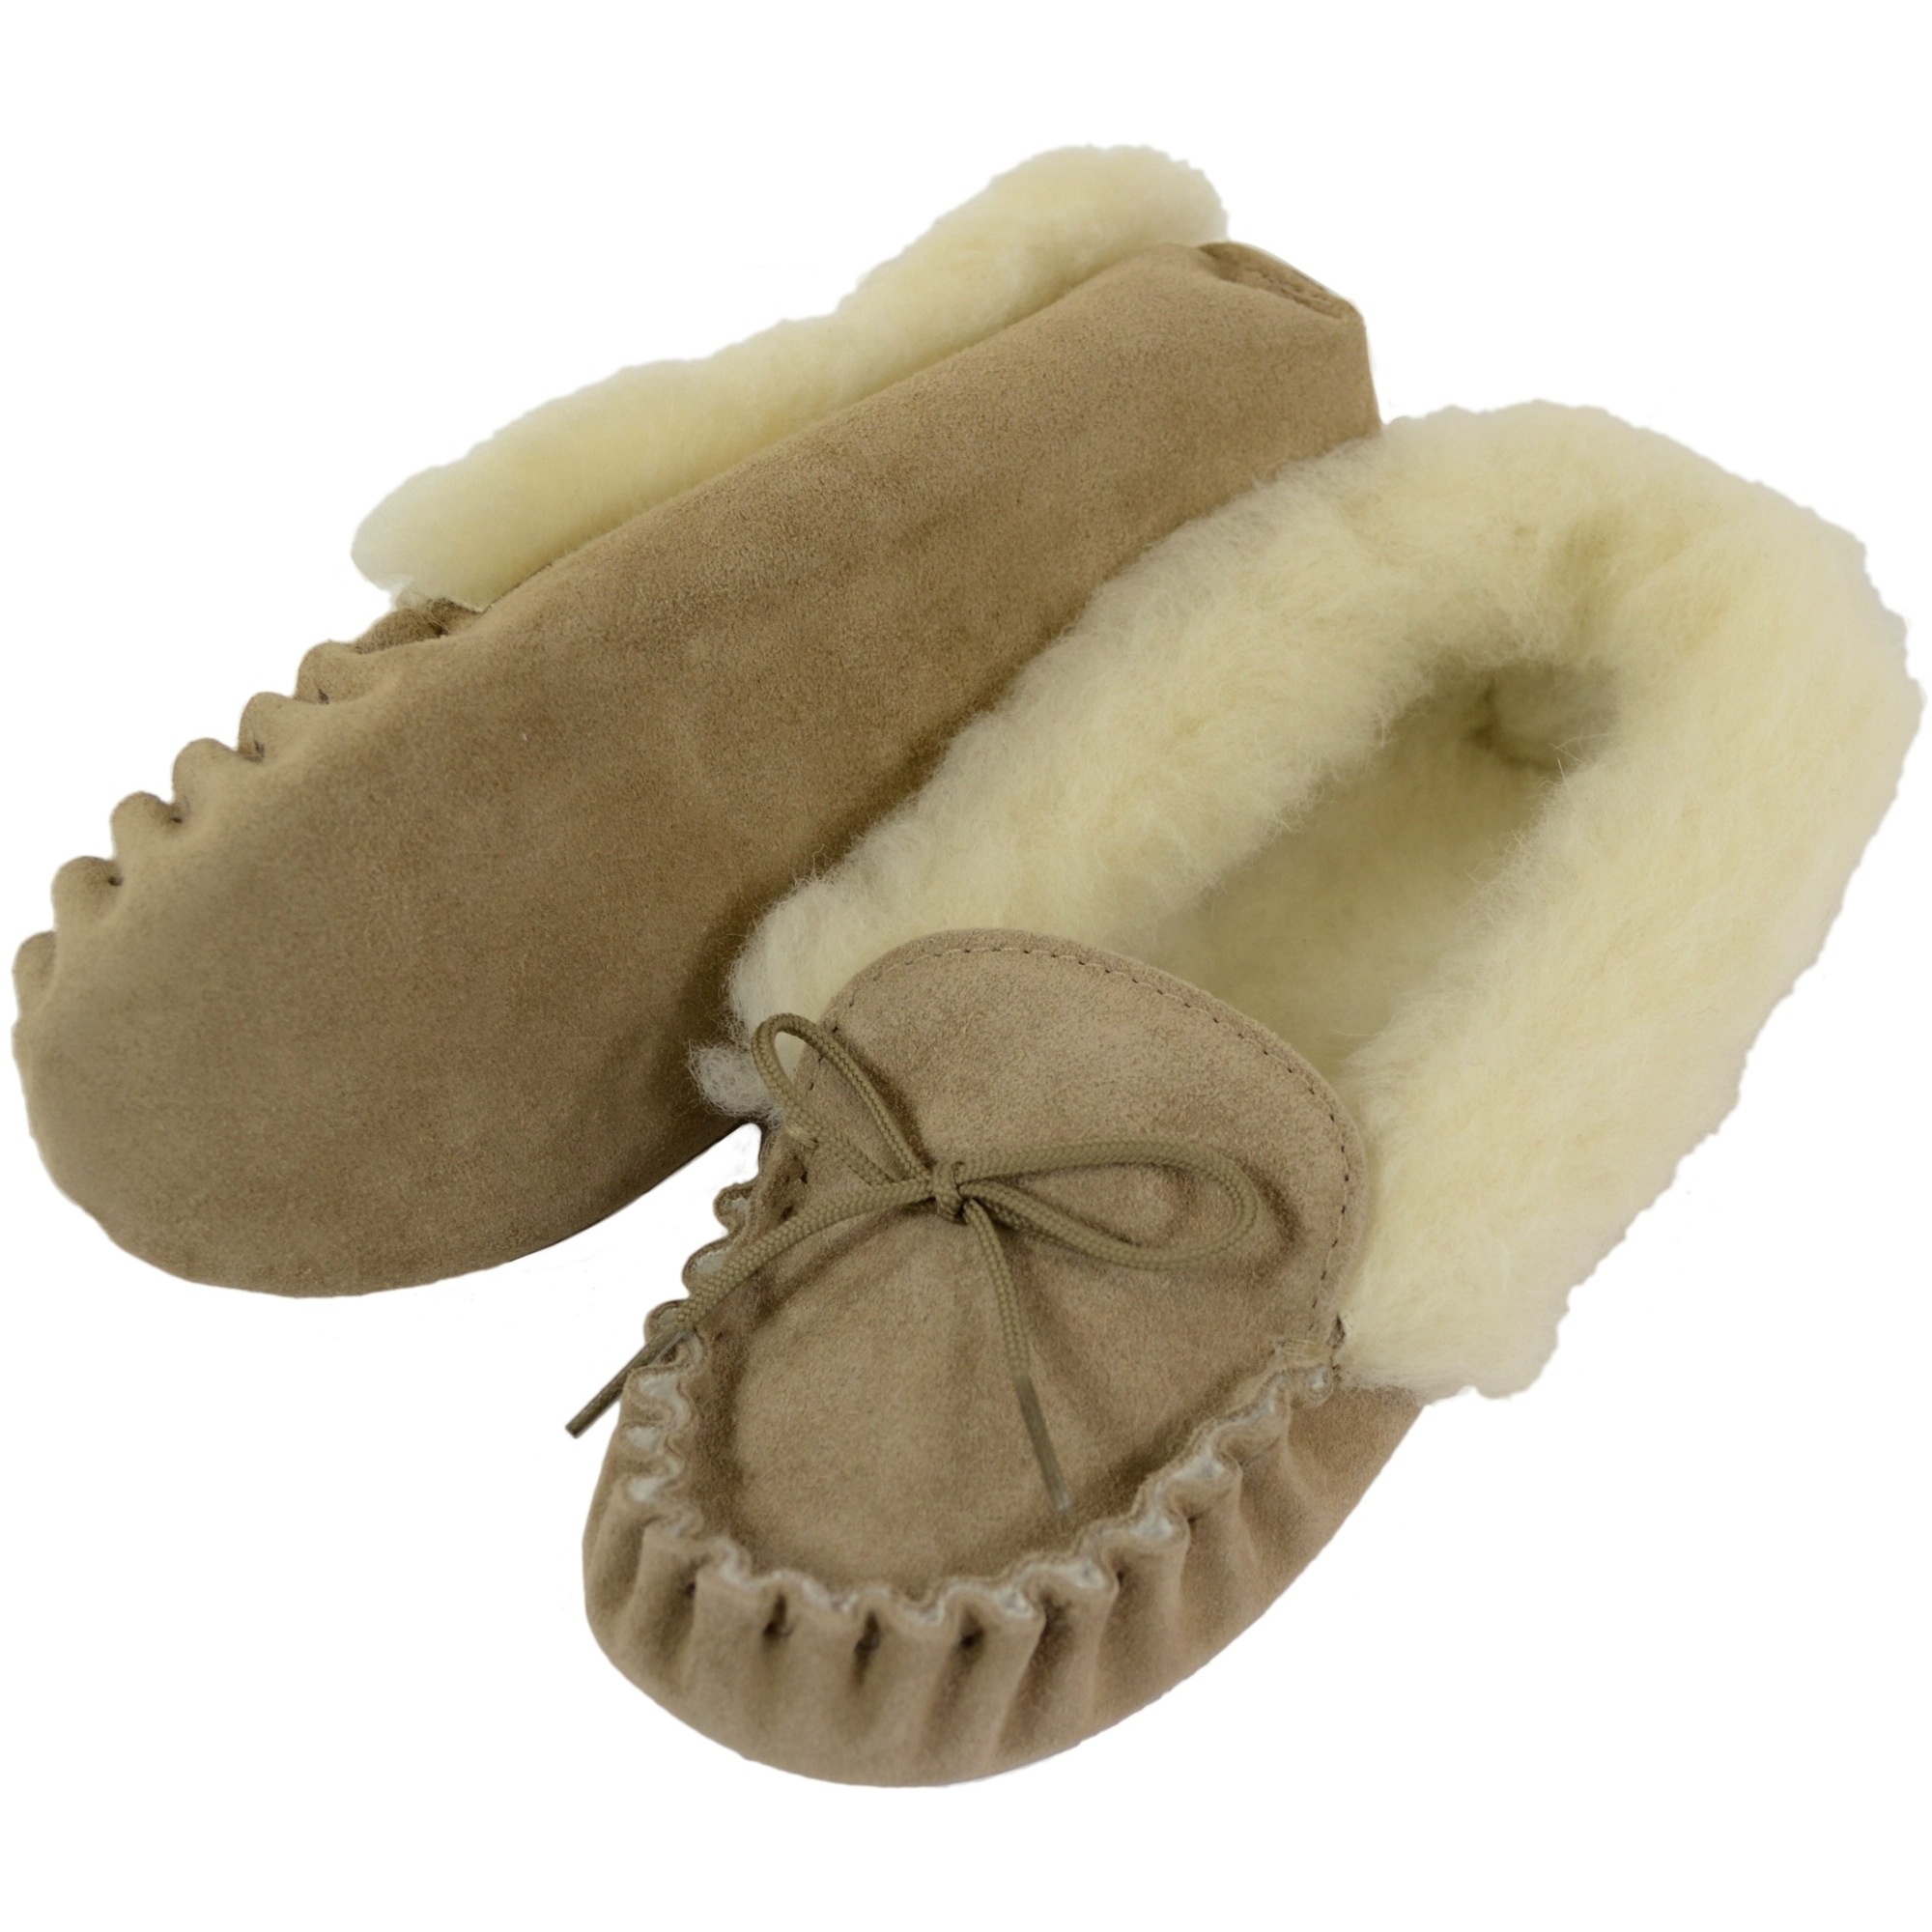 Sheepskin Slippers With Cuff in Chestnut: 09 - the Old Byre Showroom